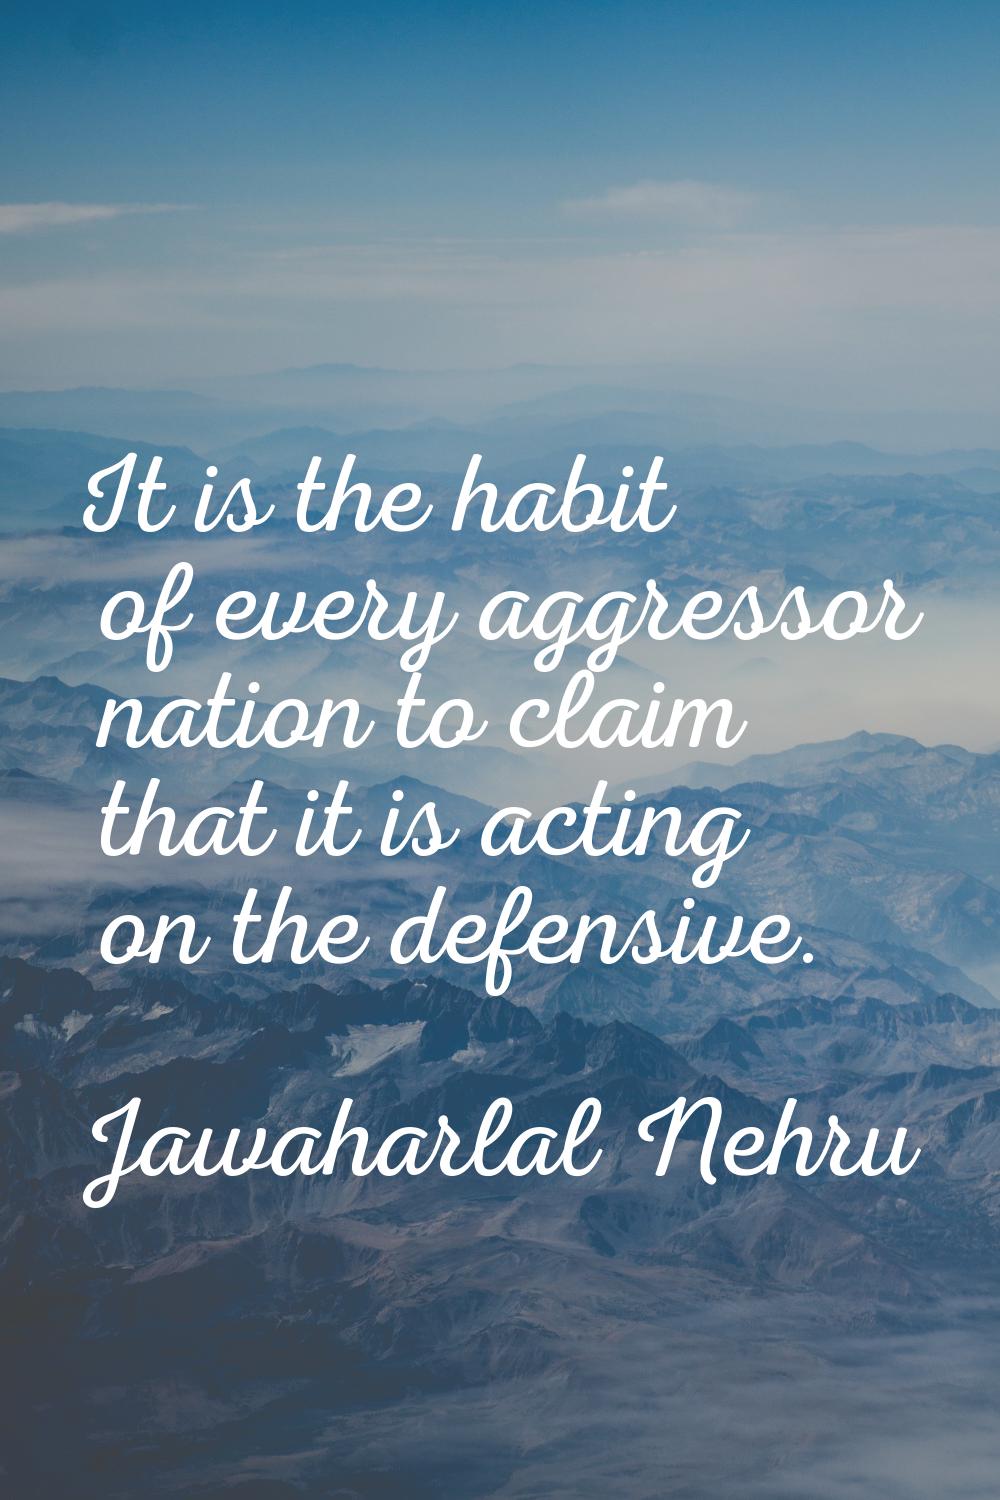 It is the habit of every aggressor nation to claim that it is acting on the defensive.